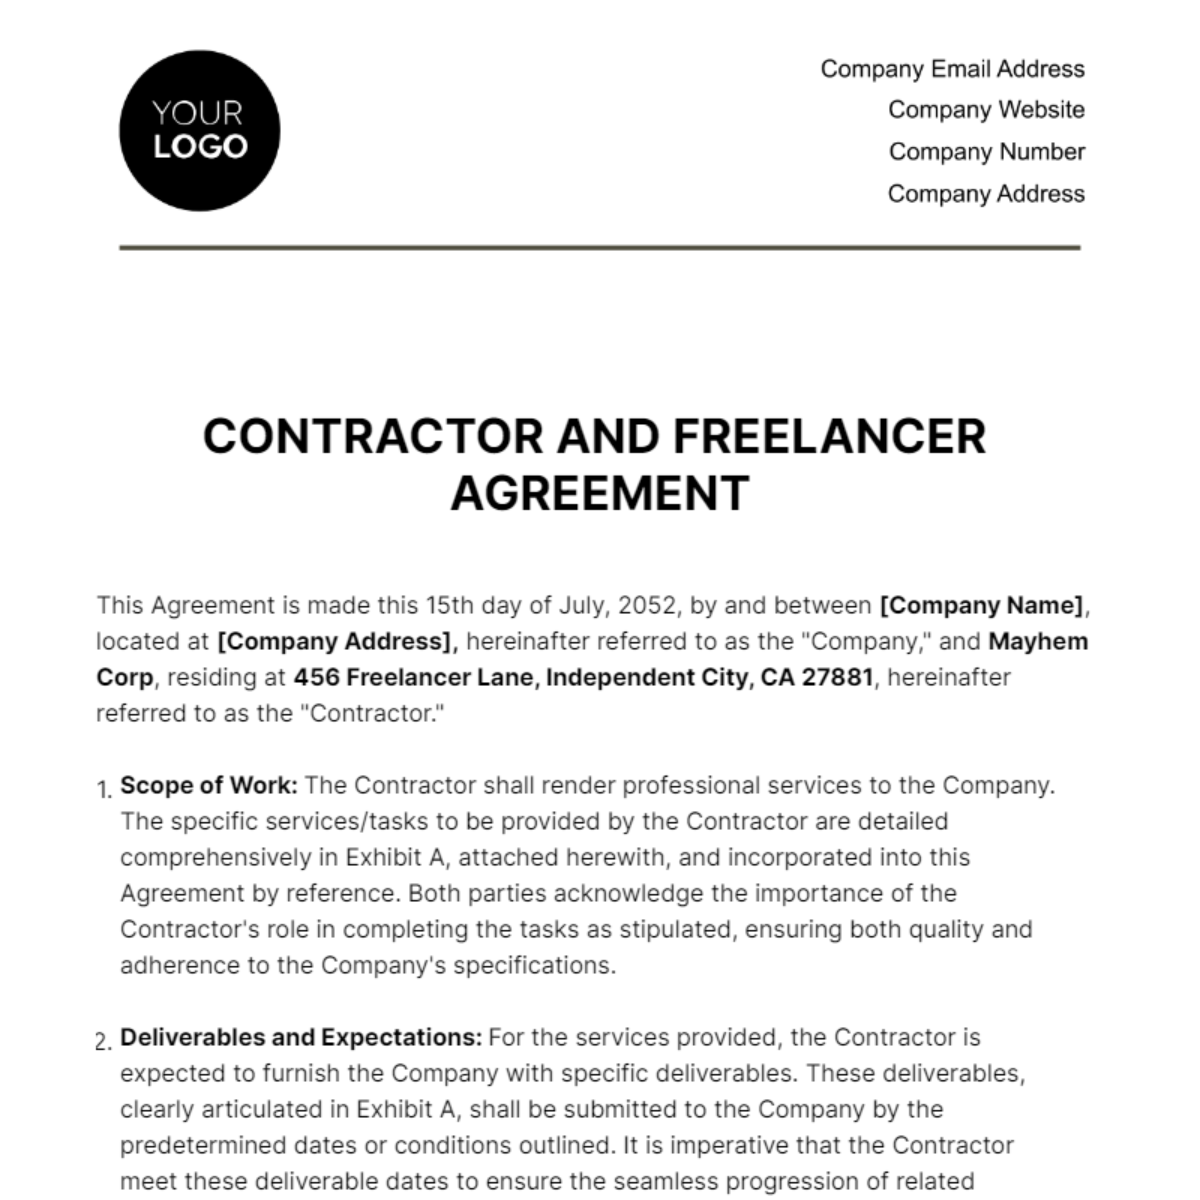 Contractor and Freelancer Agreement HR Template